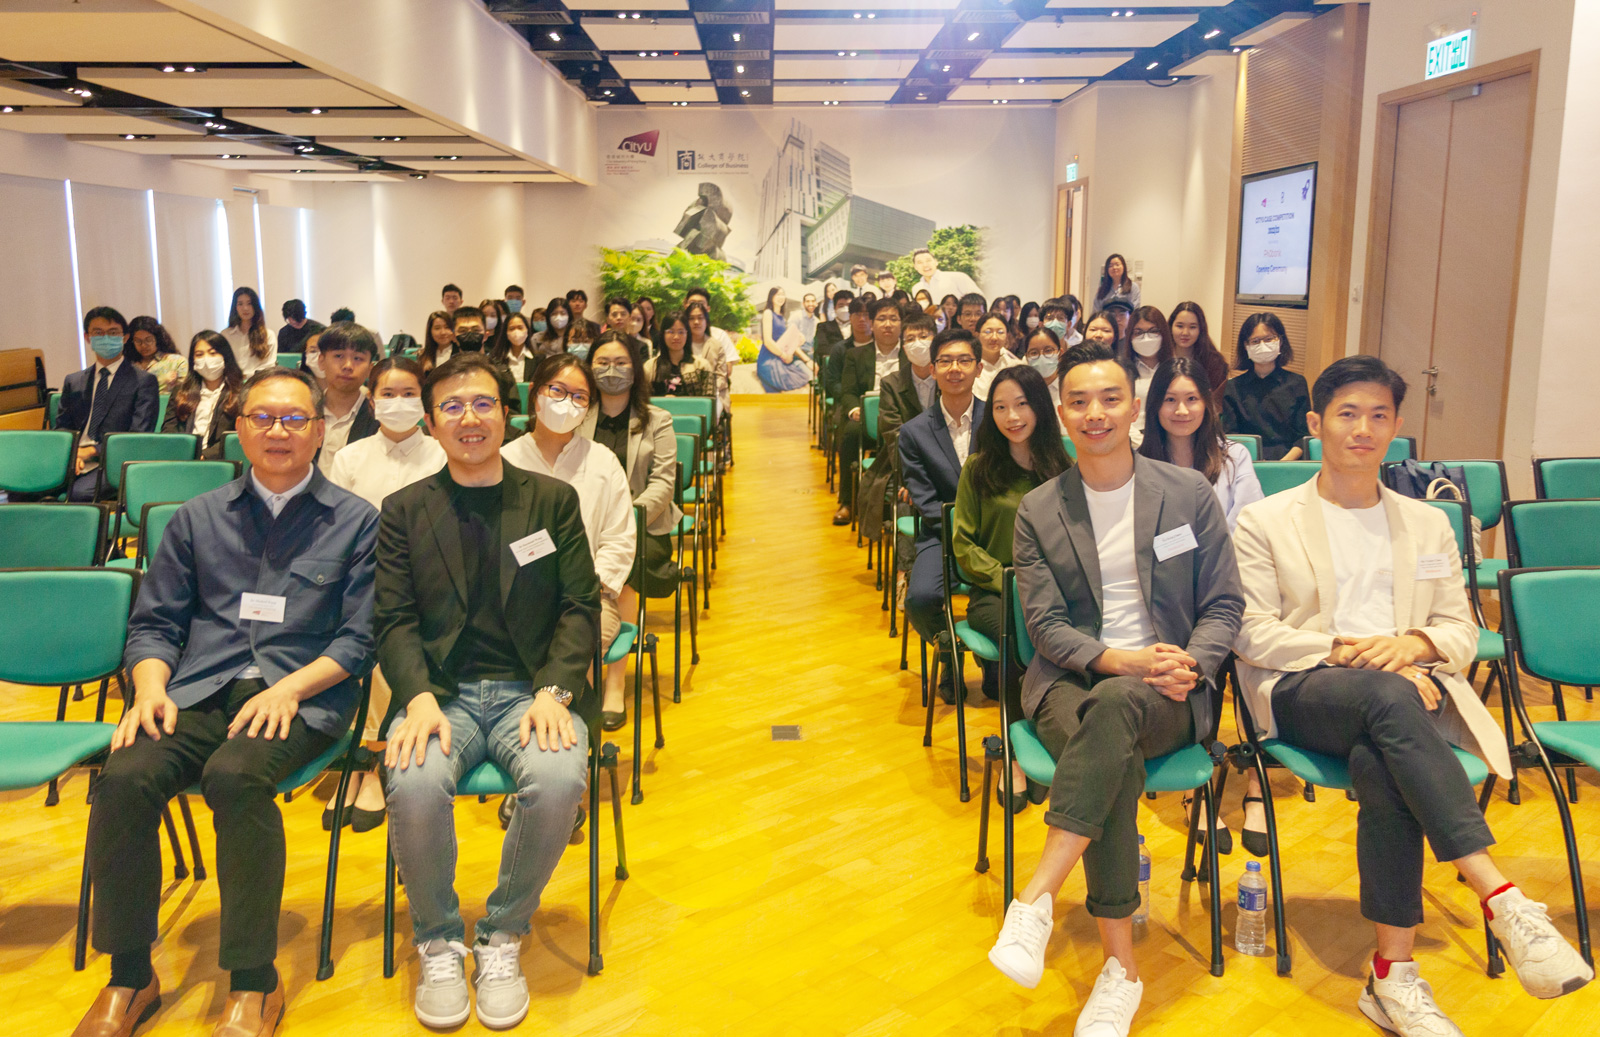 CityU Case Competition 2022/23 Kicks Off with Inspiring Opening Ceremony